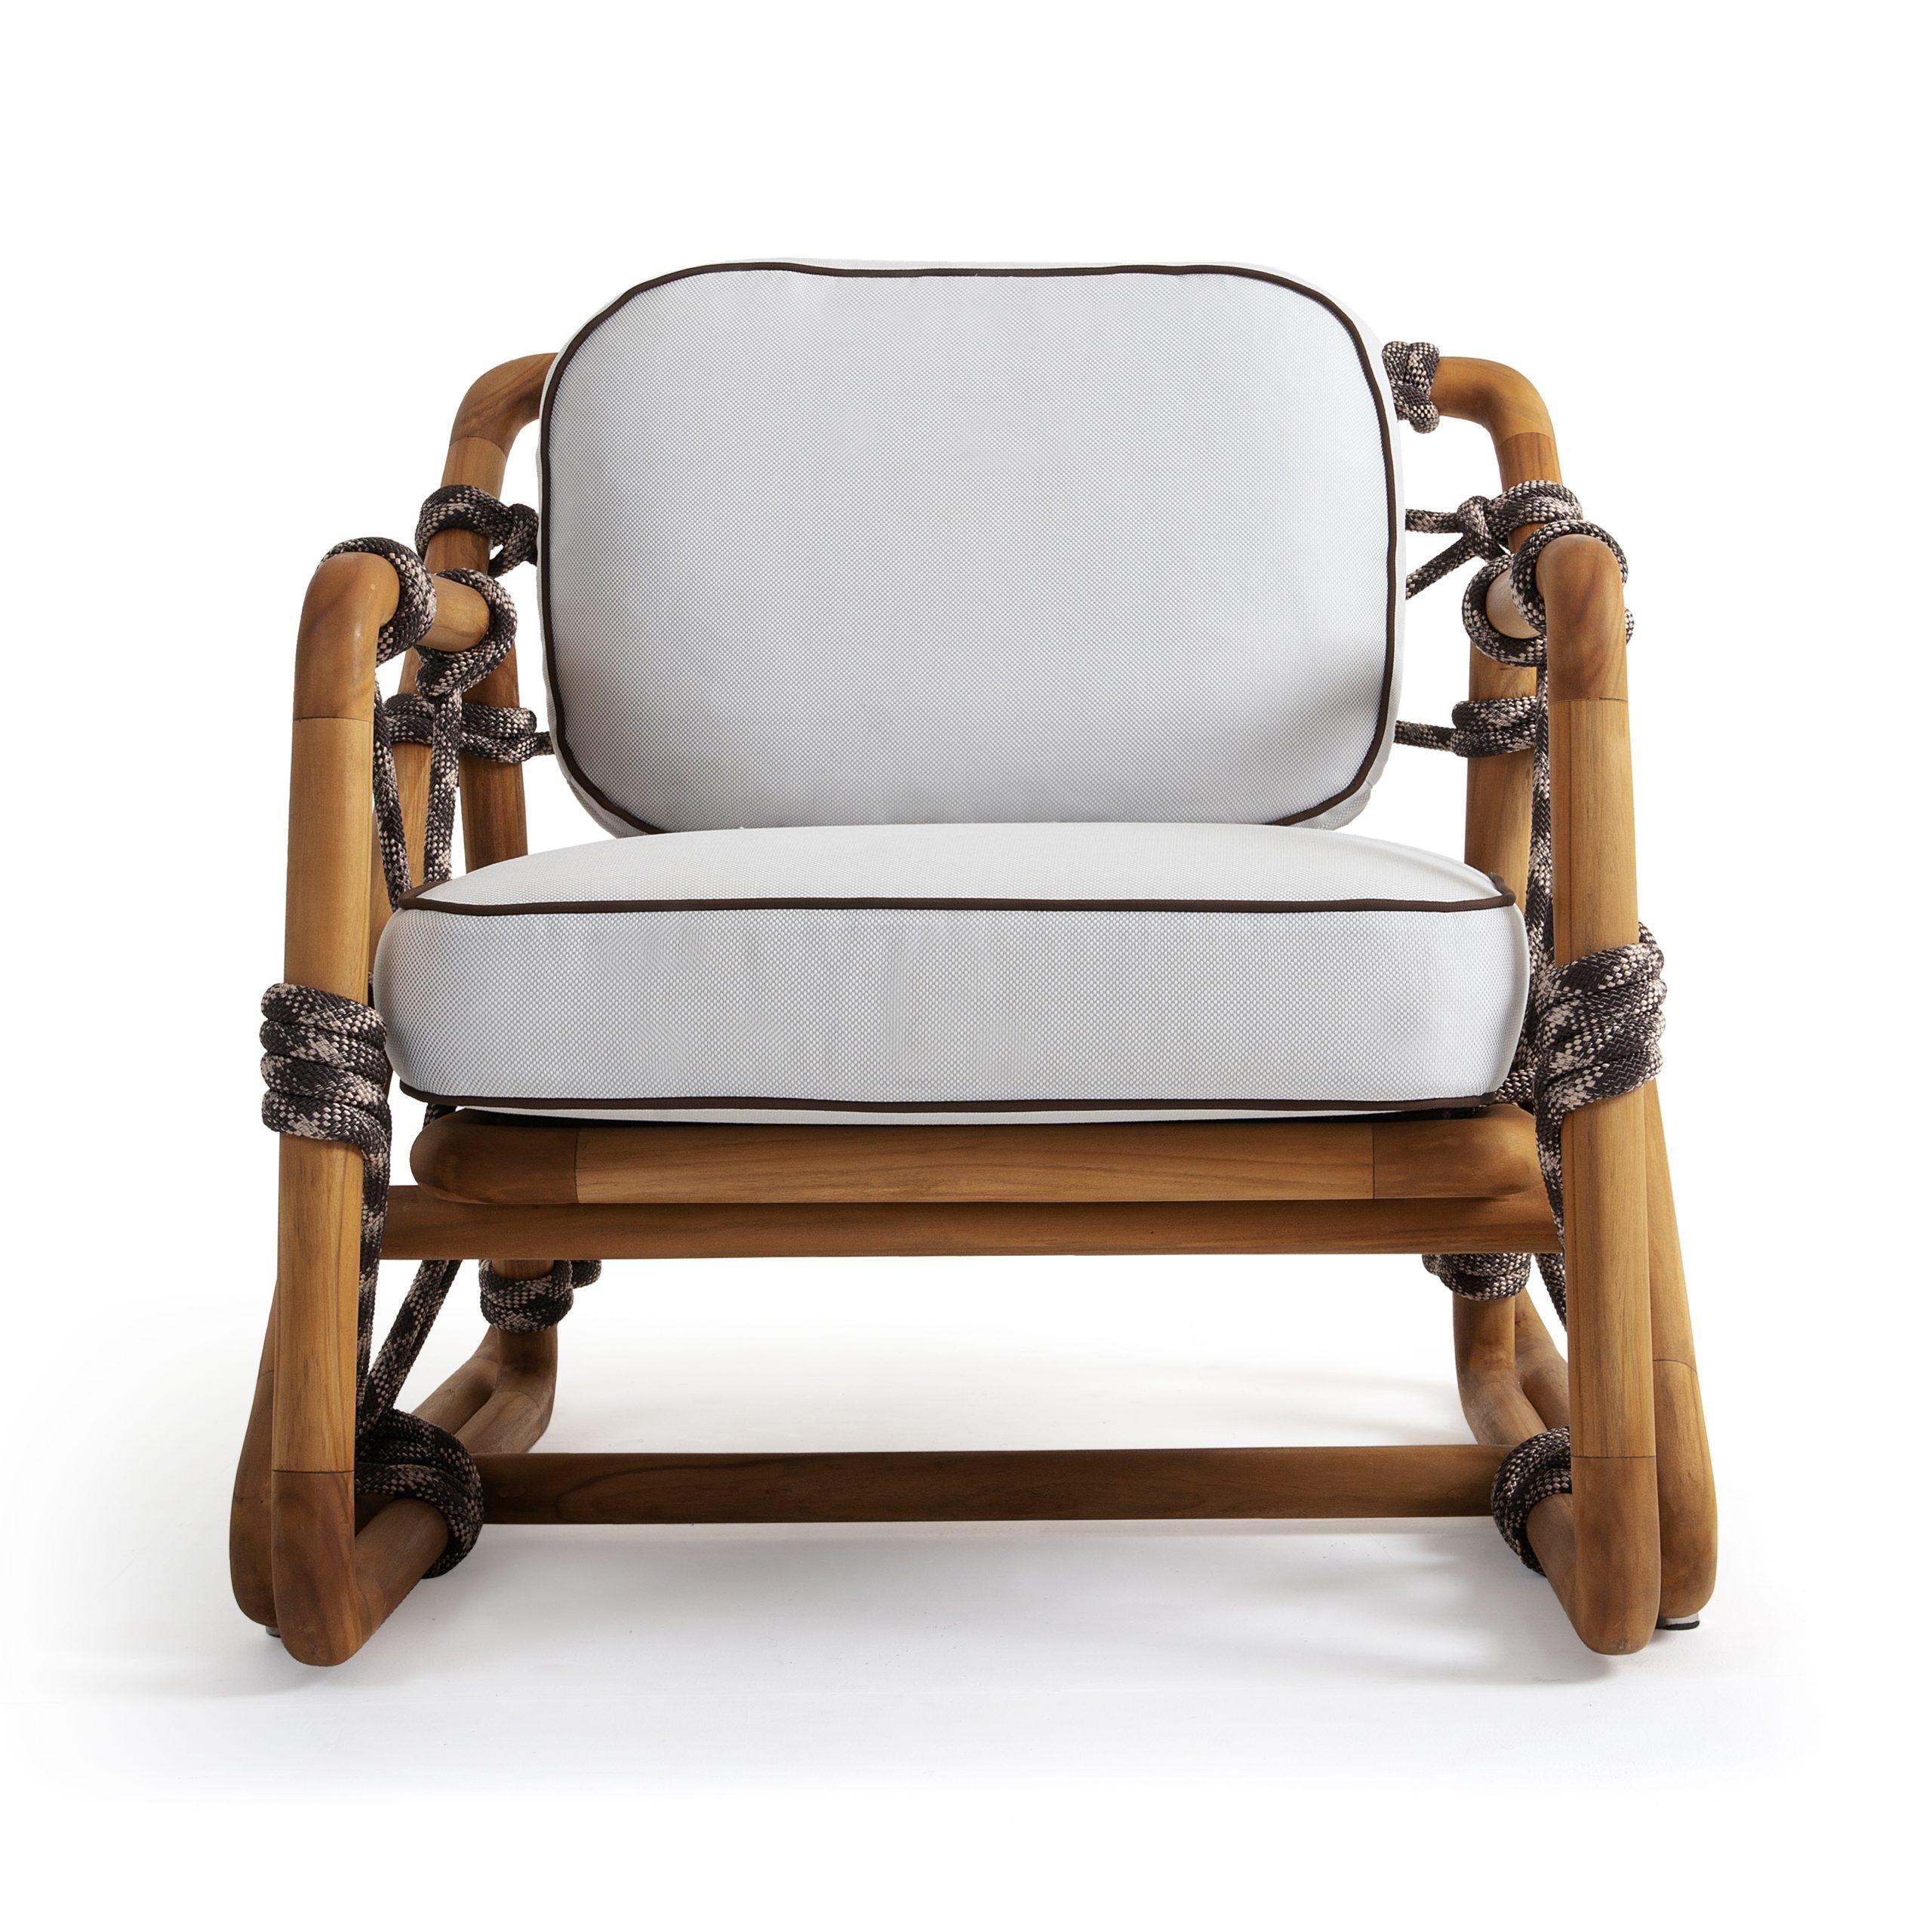 Structure: Teak wood offered in various stains.
Metal: heavy load, anti-scratch easy clean.
Weaving: Flat 4mm. high tenacity, low shrinkage filament yarn made of 100% polyester, easy clean.
Fixed Upholstery with high quality quick dry foam.
The